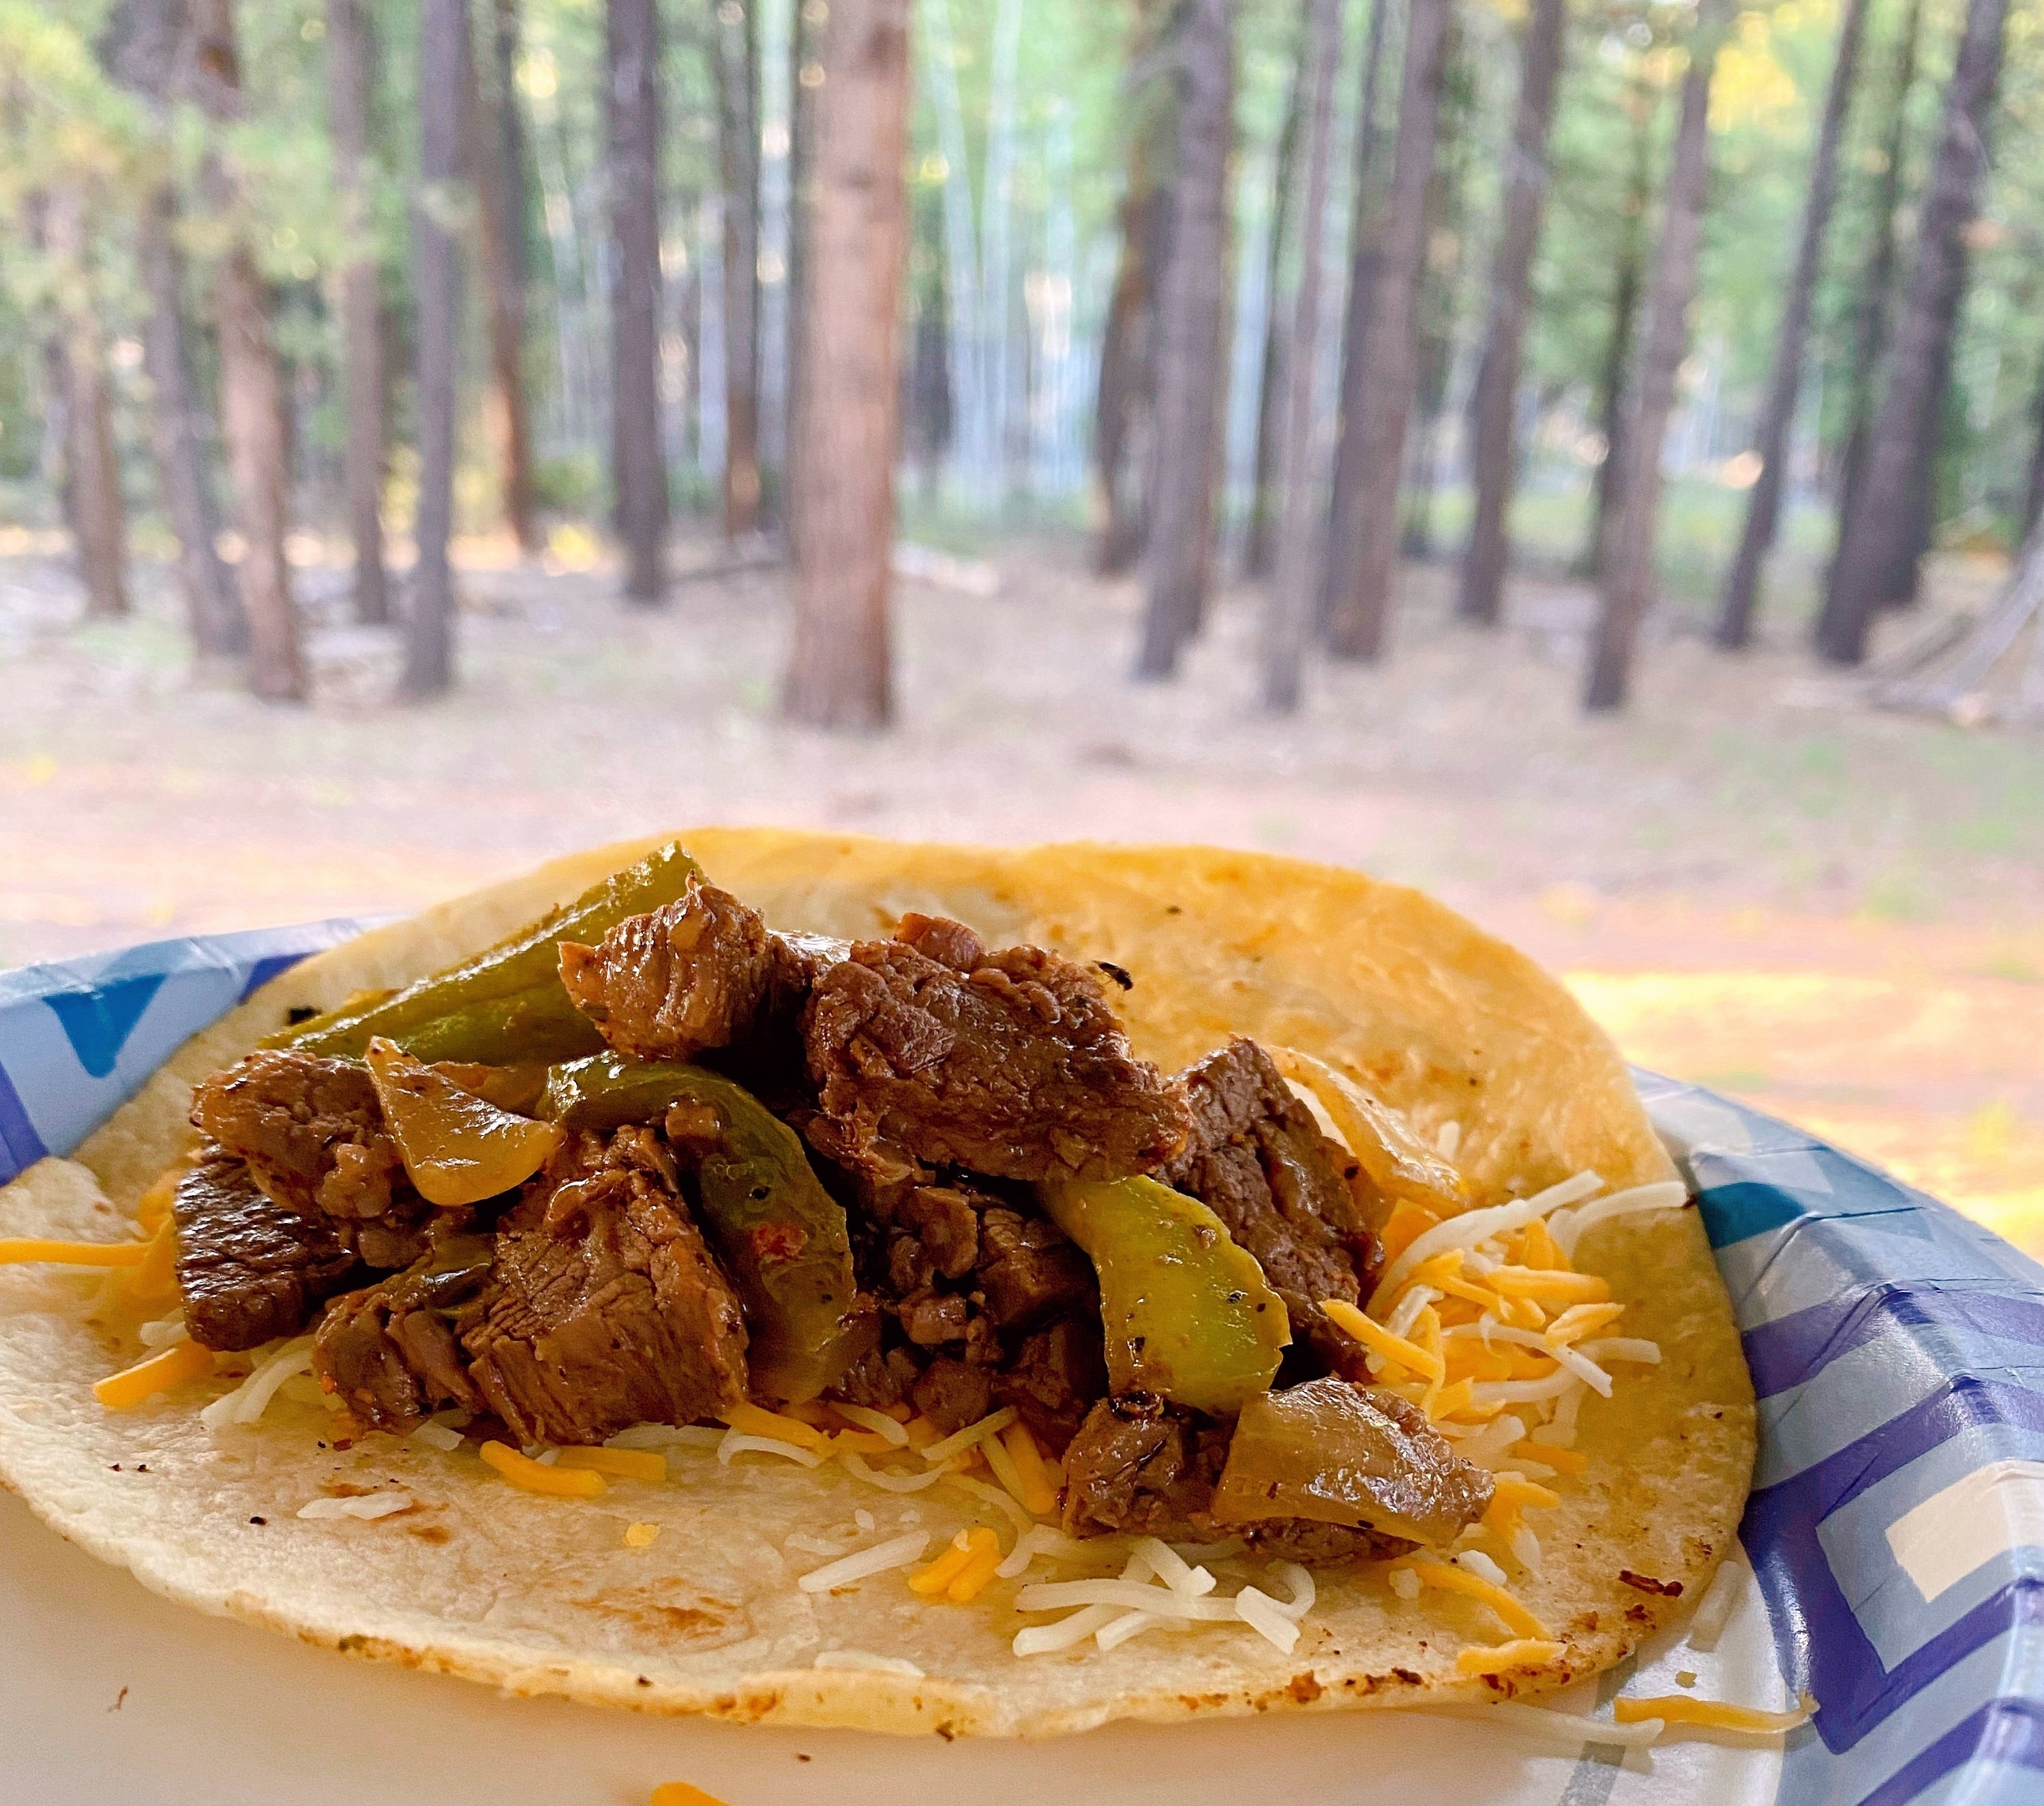 Blackstone Steak Fajitas on a paper plate with the forest in the background.